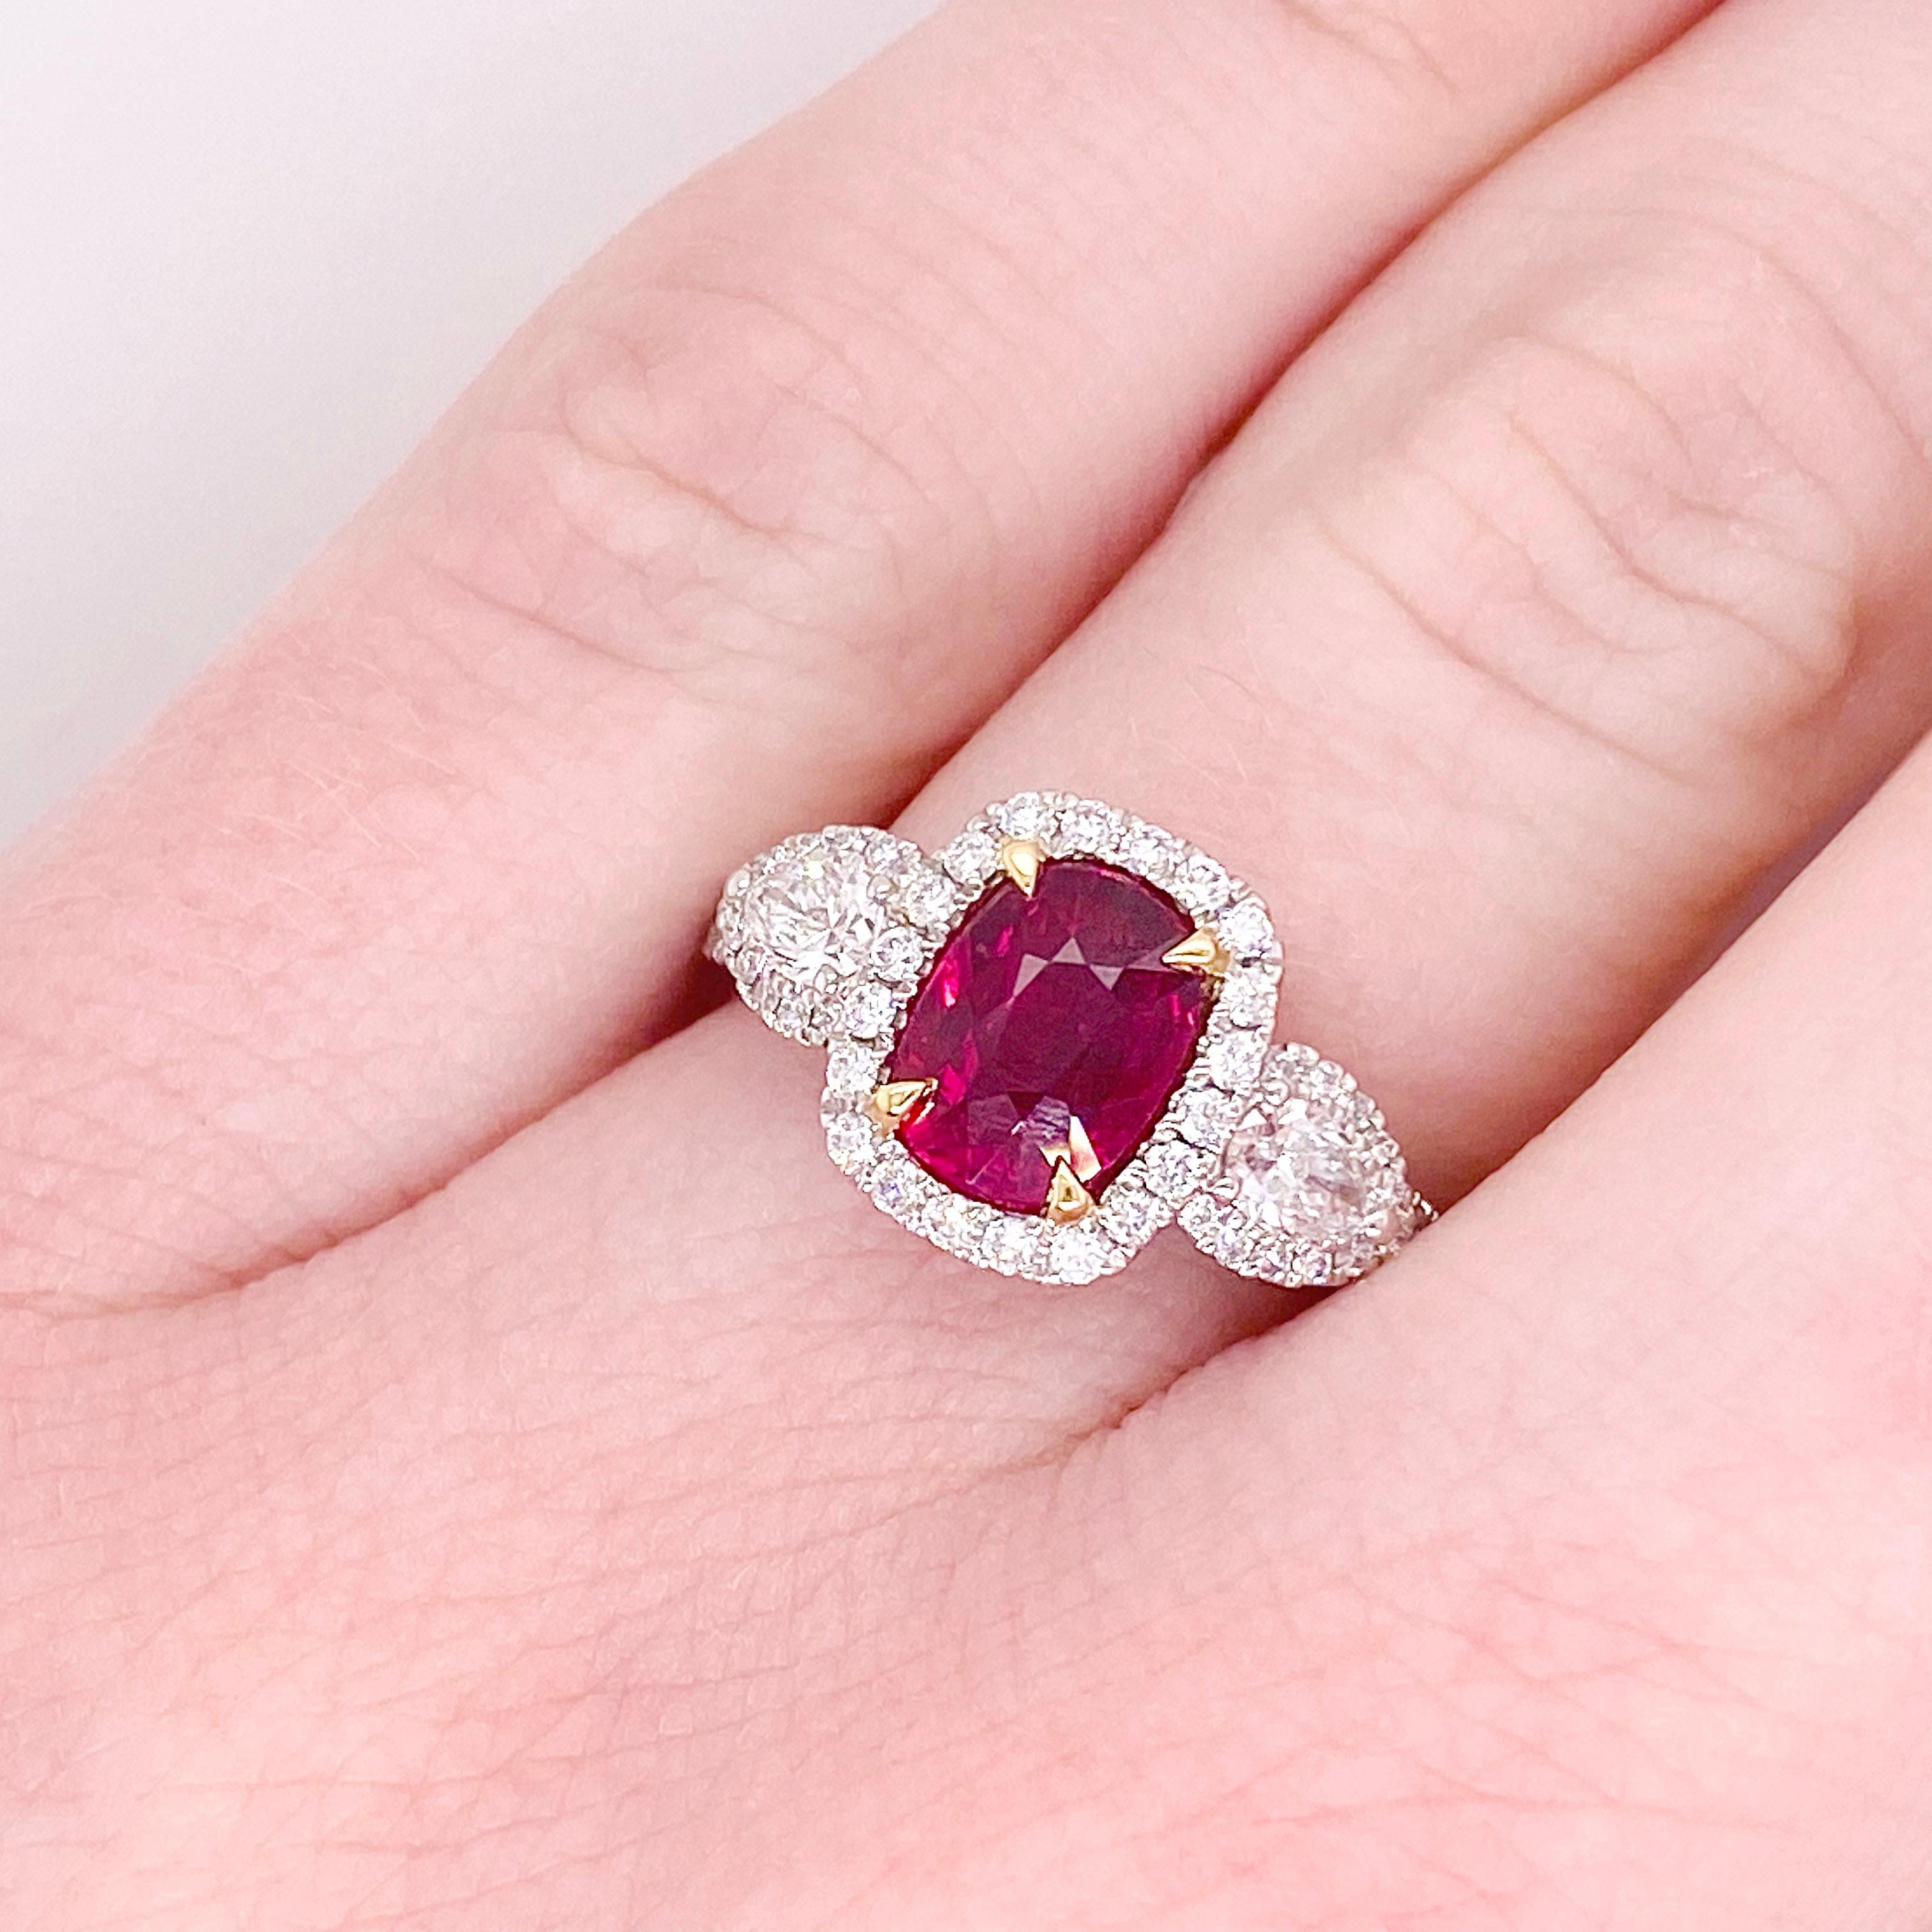 Rubies have been treasured for thousands of years as the gem of passion and desire. Finding a ruby with such a fiery red color without having to be heated is an incredibly rare find and; therefore, makes it so much more valuable. The ruby's color